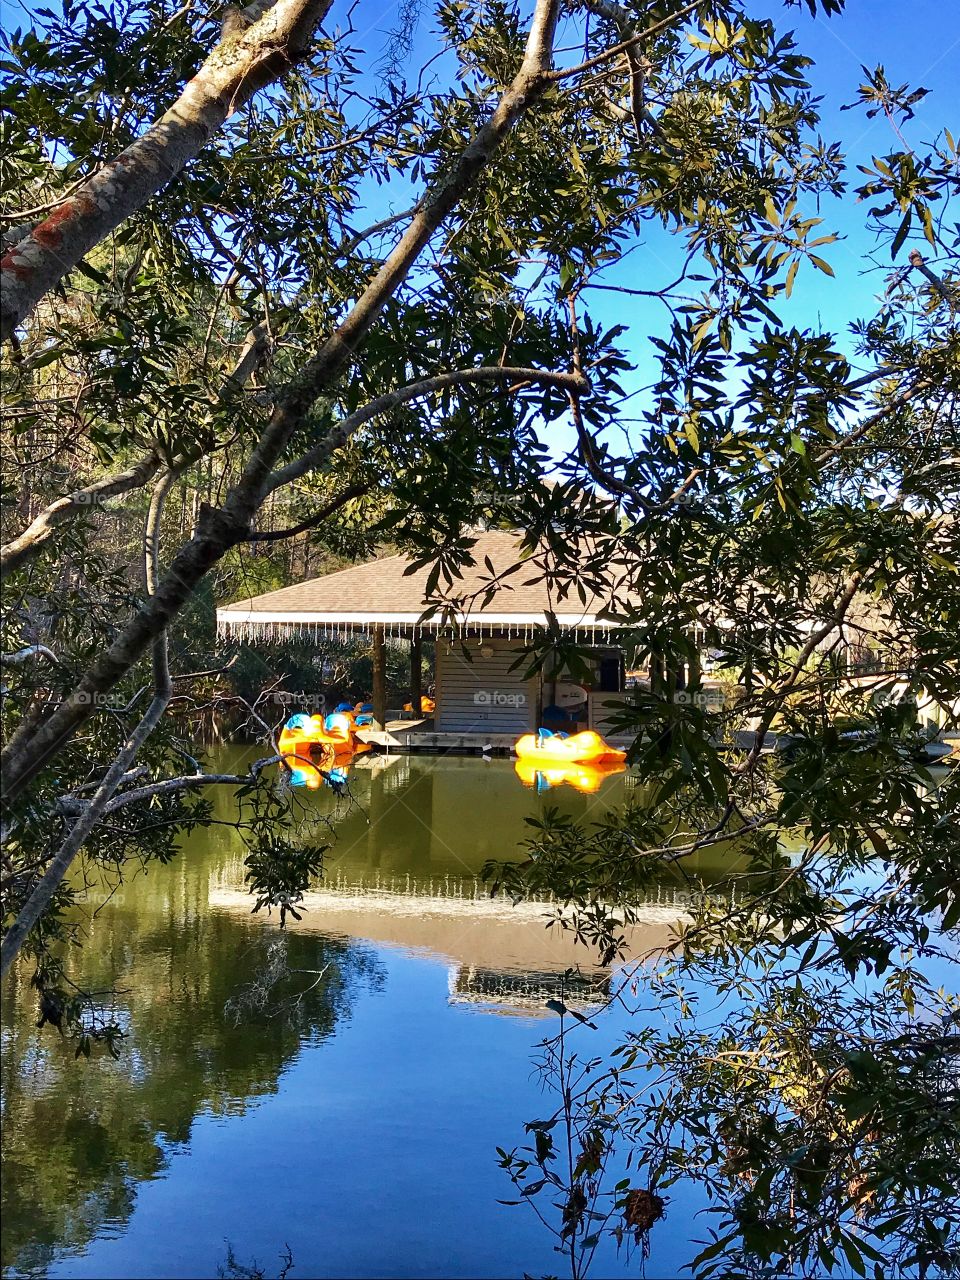 Paddle boats at the County Park